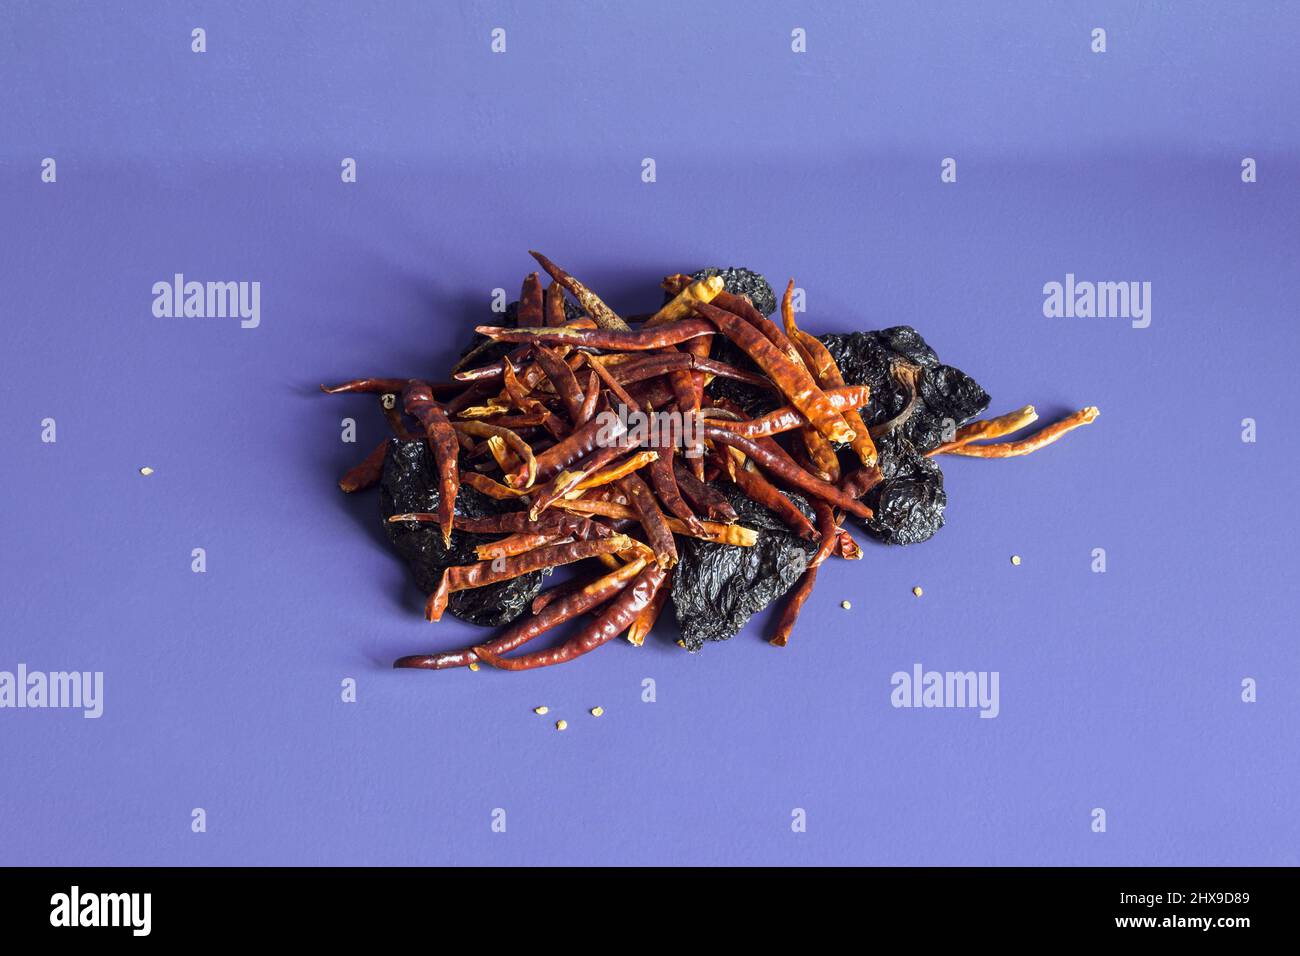 A pile of dehydrated chili peppers with dried ñora peppers on a textured color studio background. Still life and abstract decorations. Stock Photo